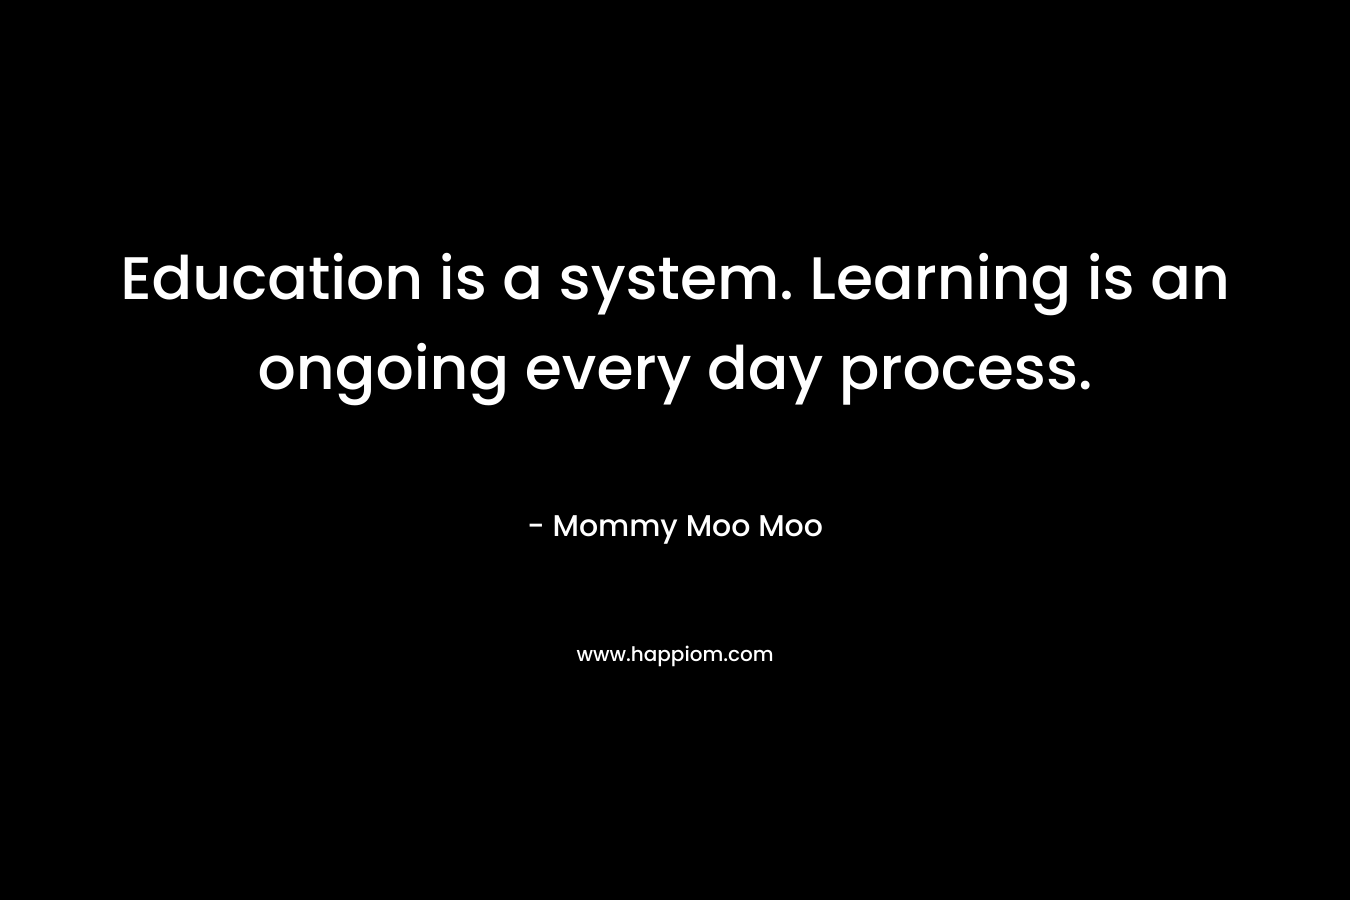 Education is a system. Learning is an ongoing every day process.